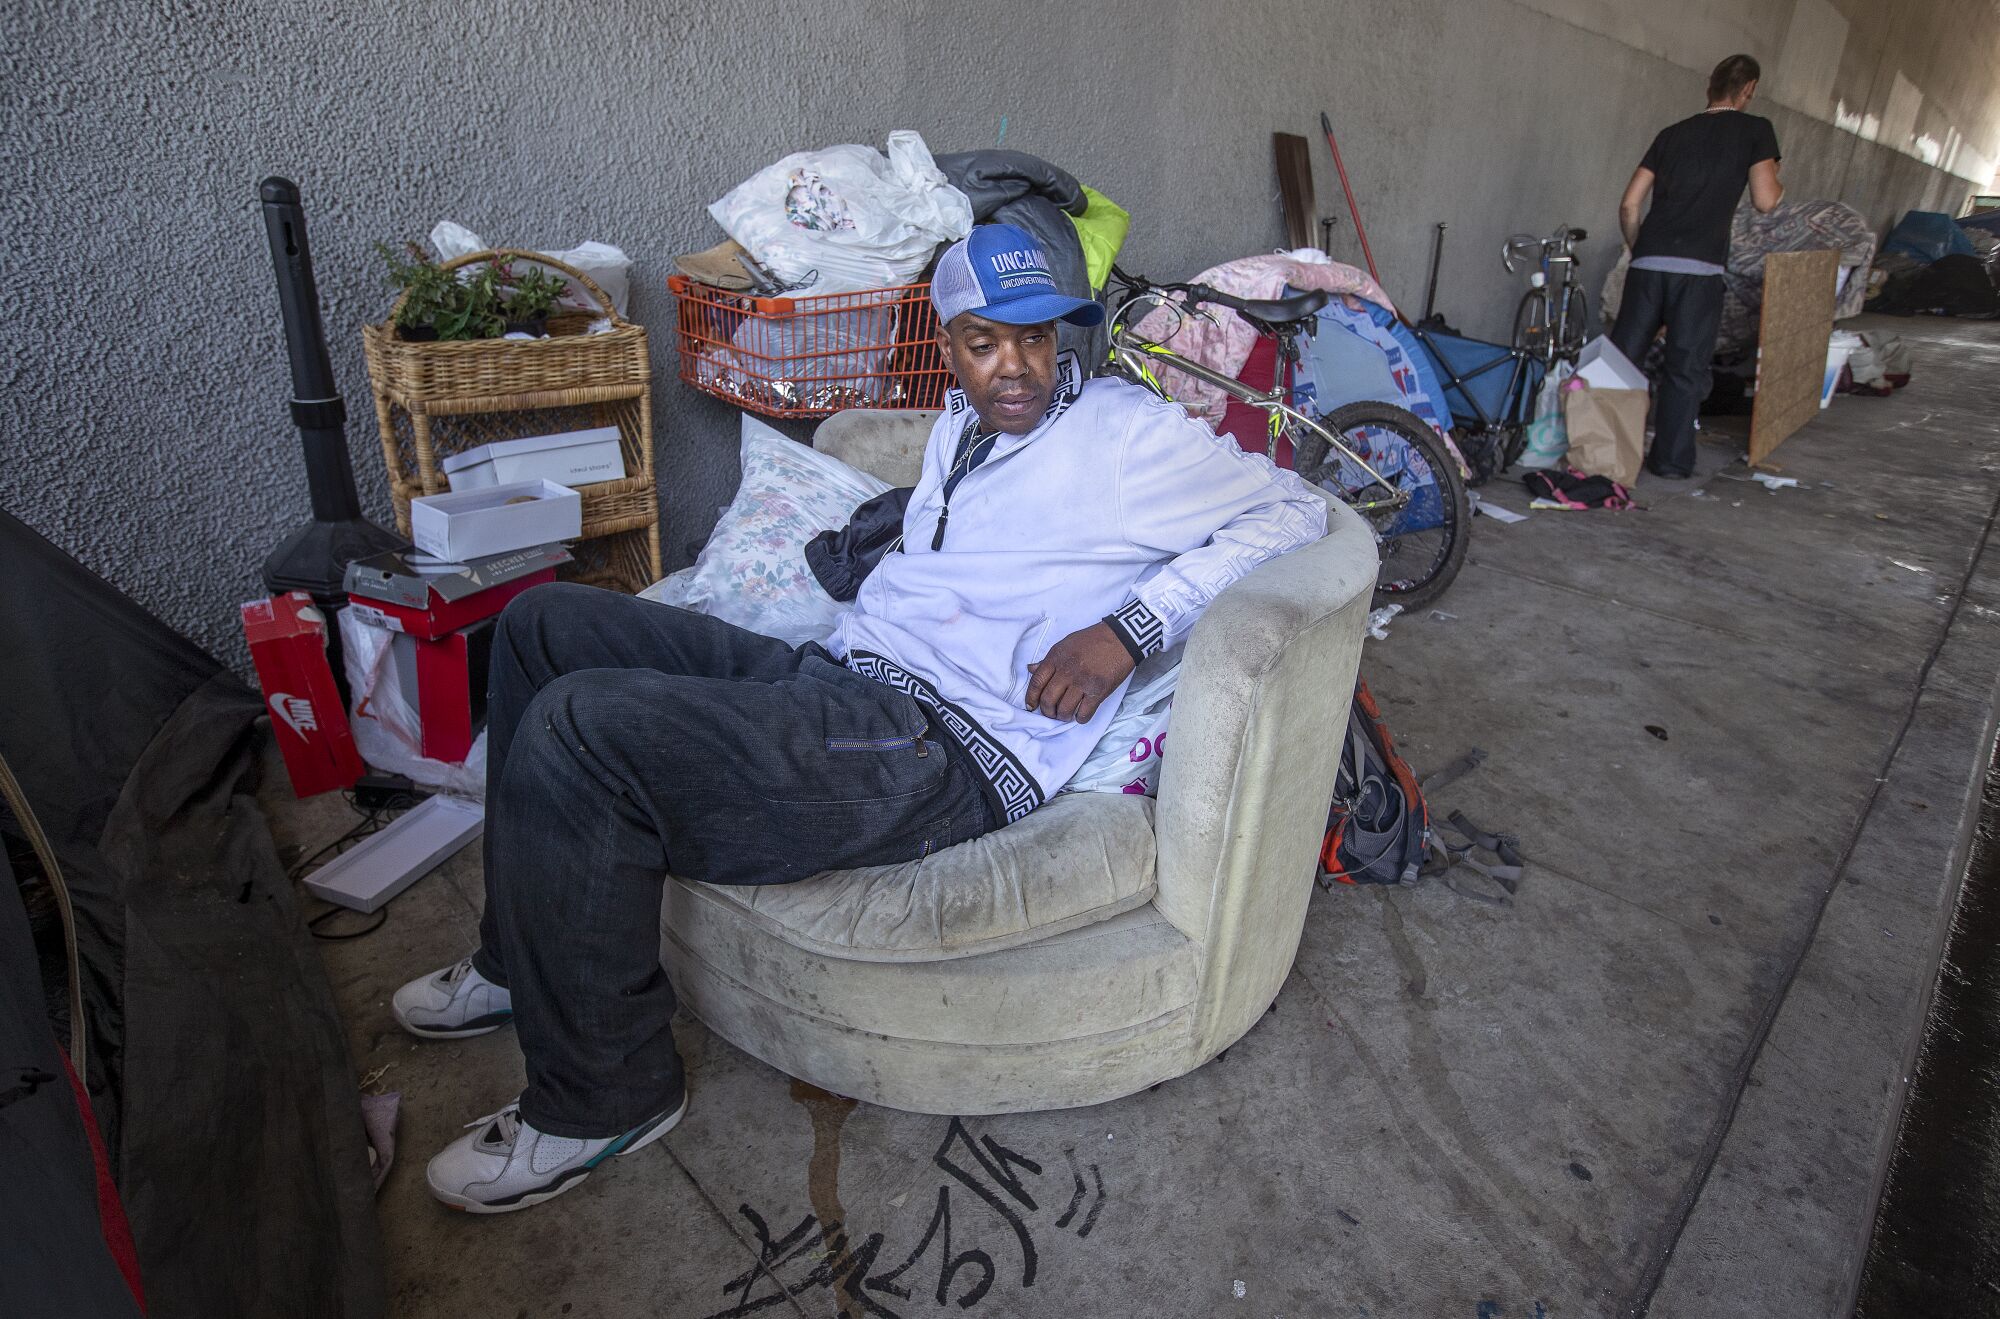 Chris Brown, who is homeless, visits friends at an encampment in Tarzana.